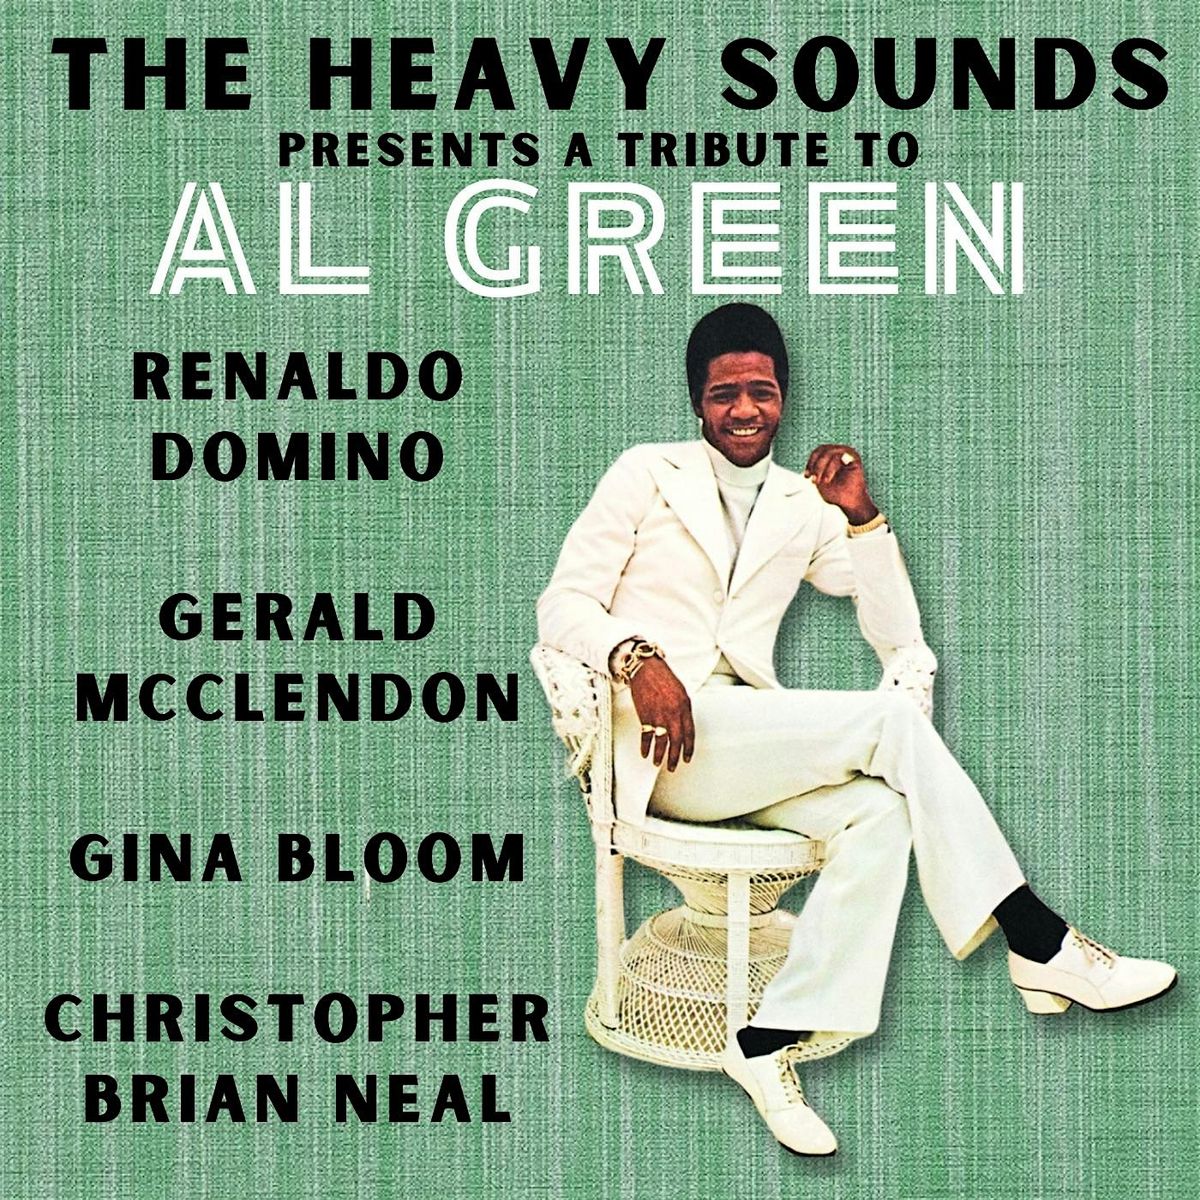 The Heavy Sounds presents A Tribute to Al Green